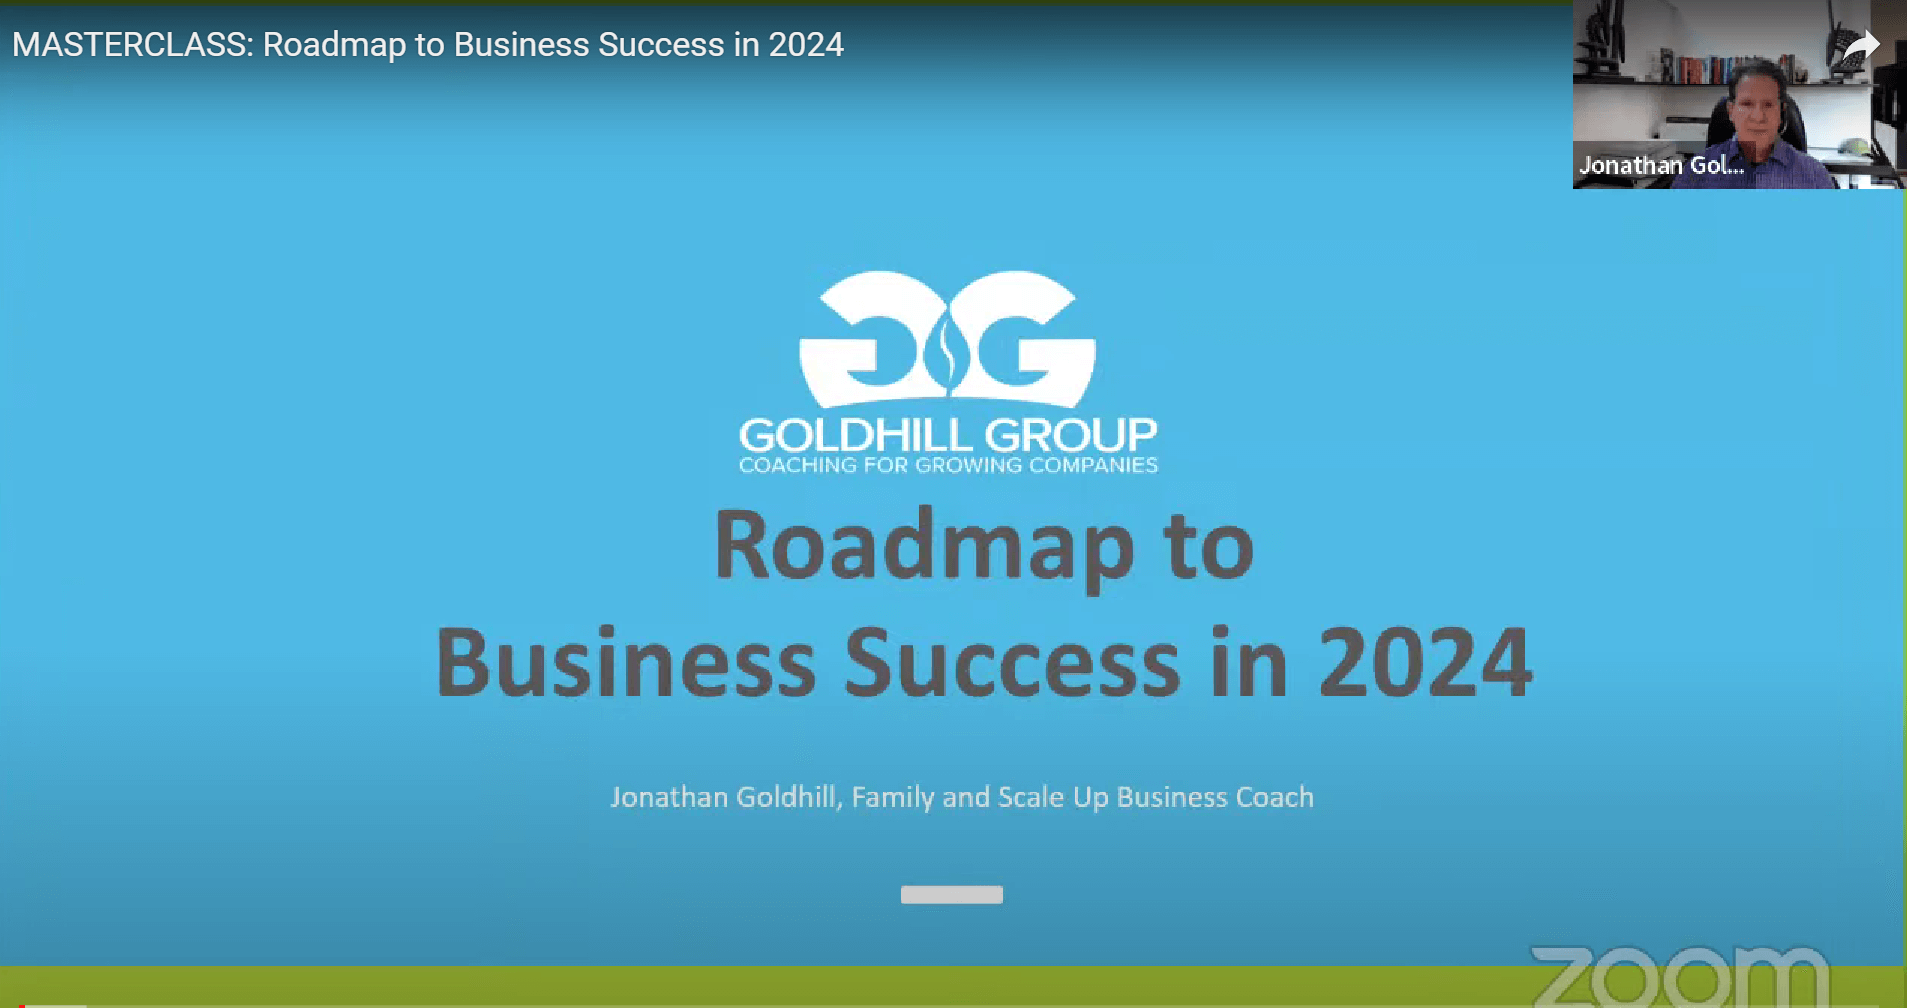 Roadmap to Business Success in 2024